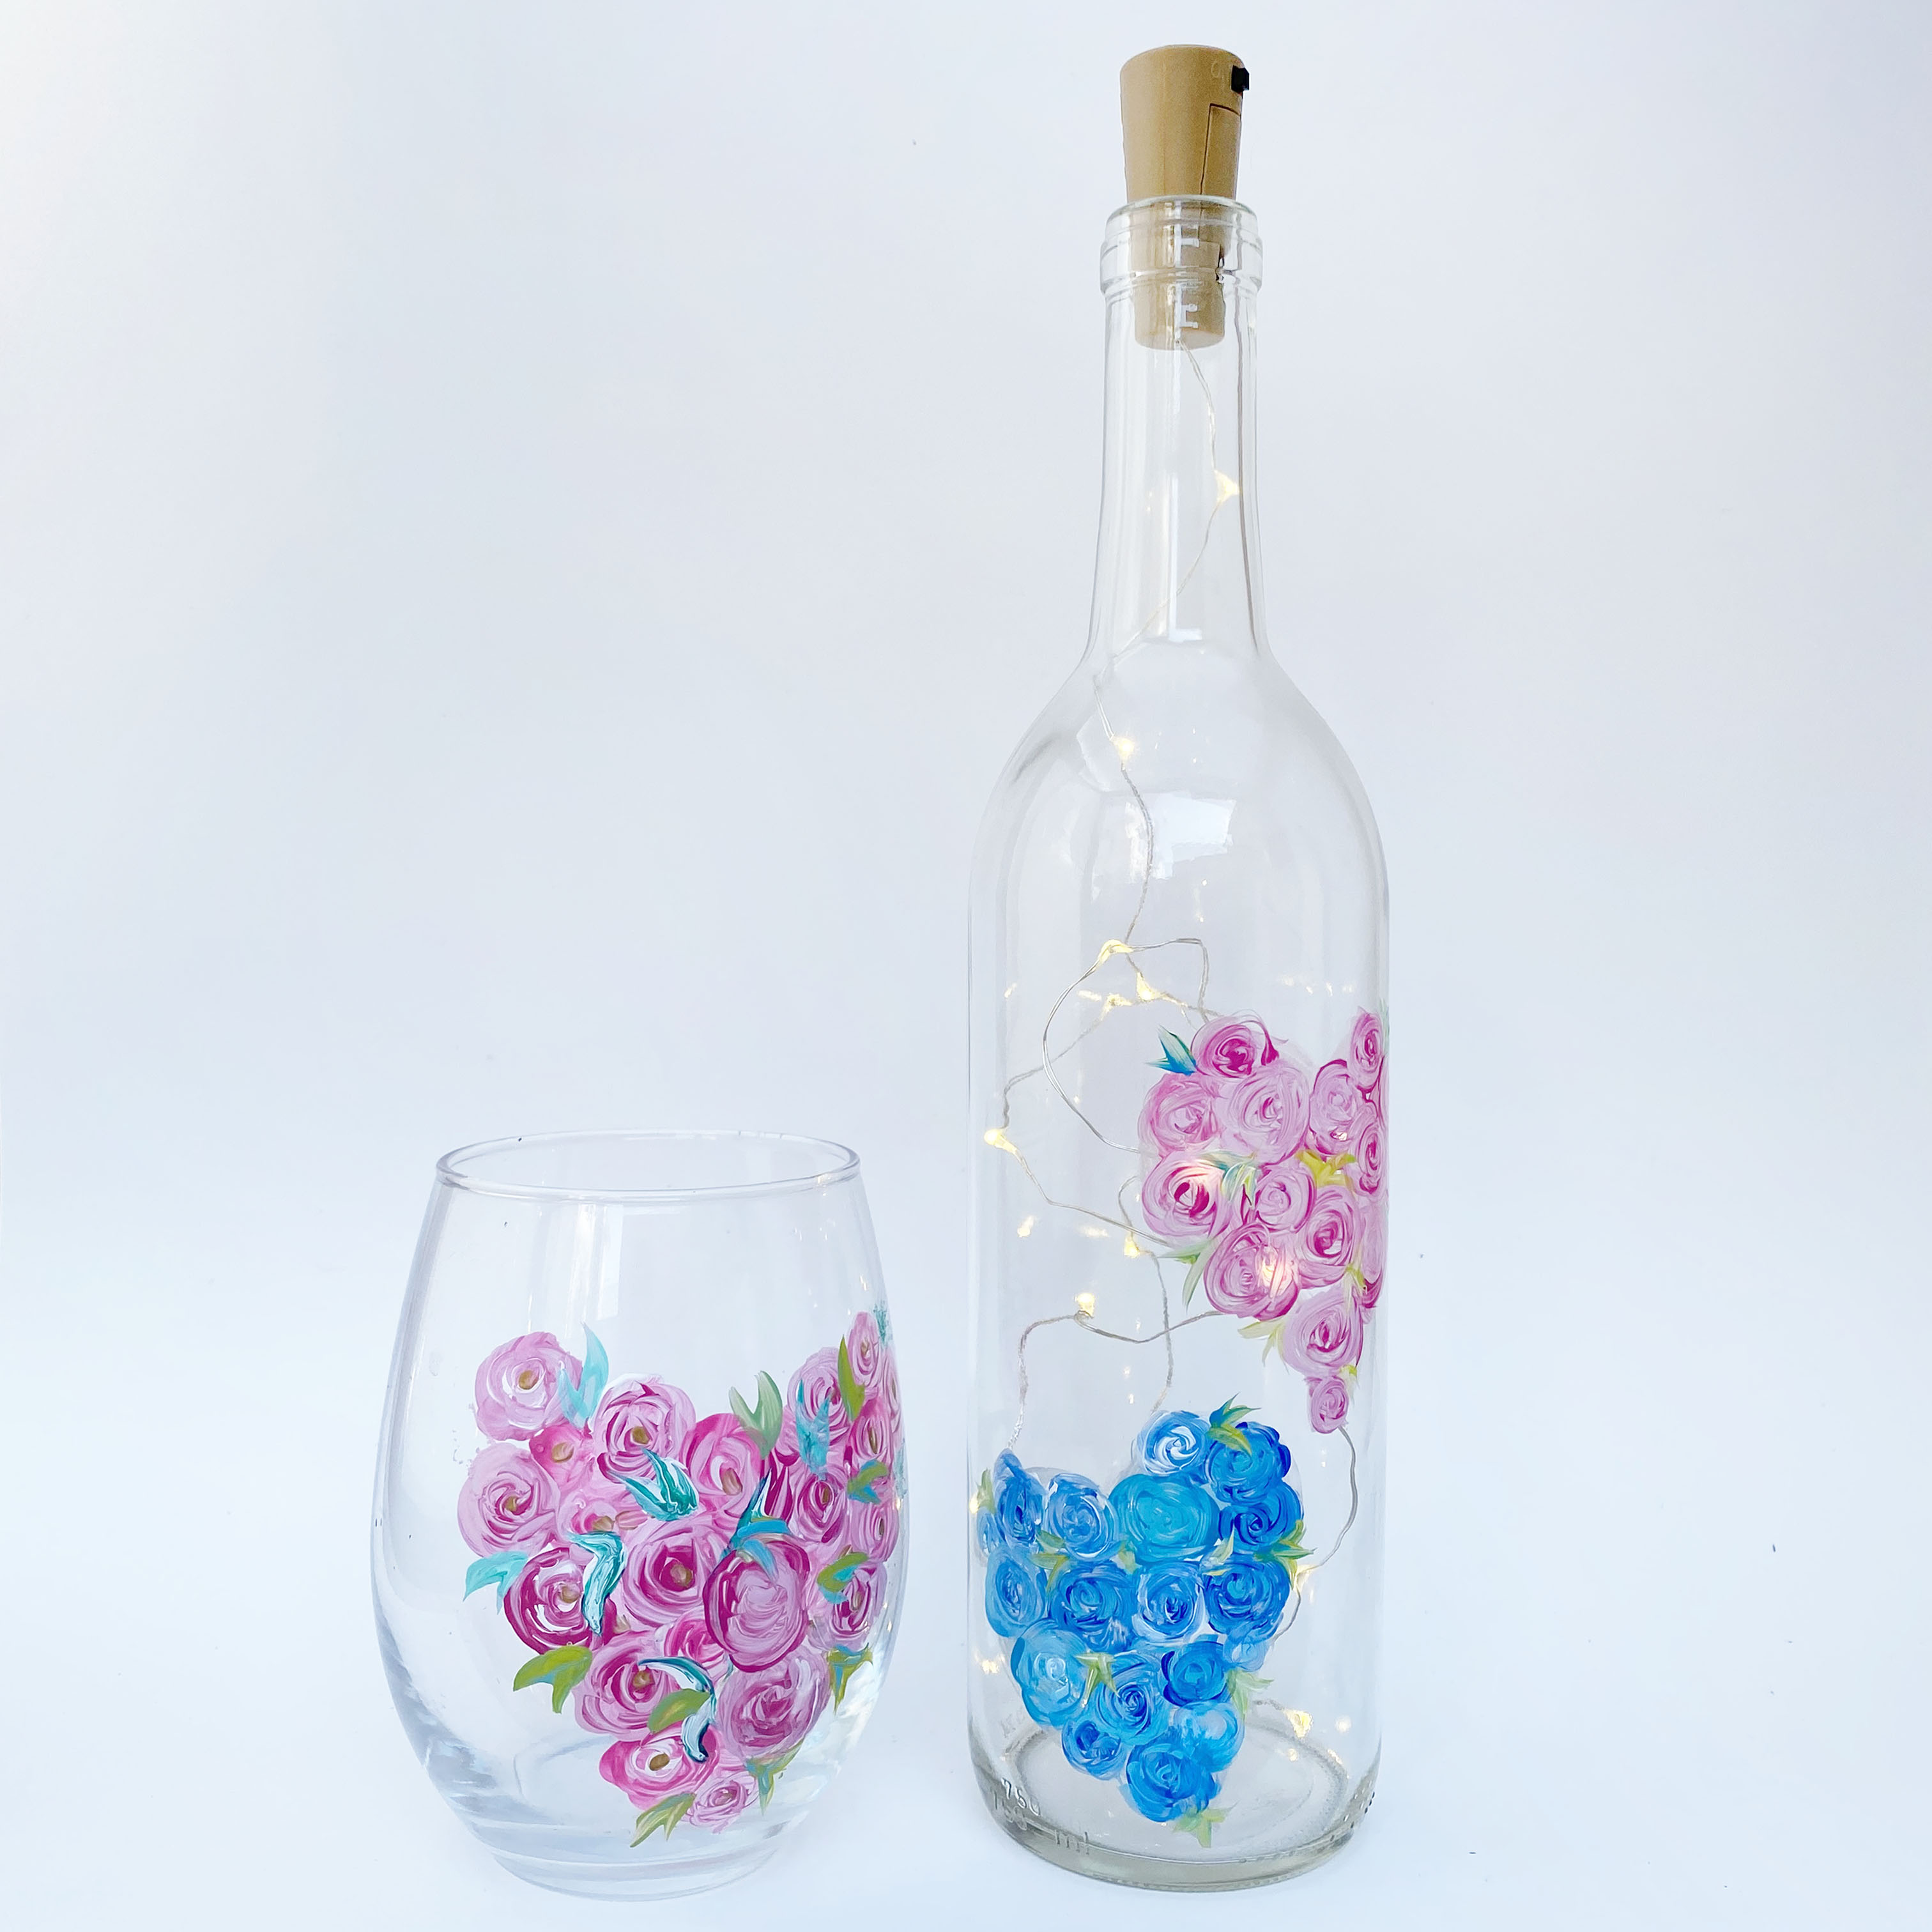 A Floral Hearts Wine Bottle and Pink Stemless Wineglass experience project by Yaymaker